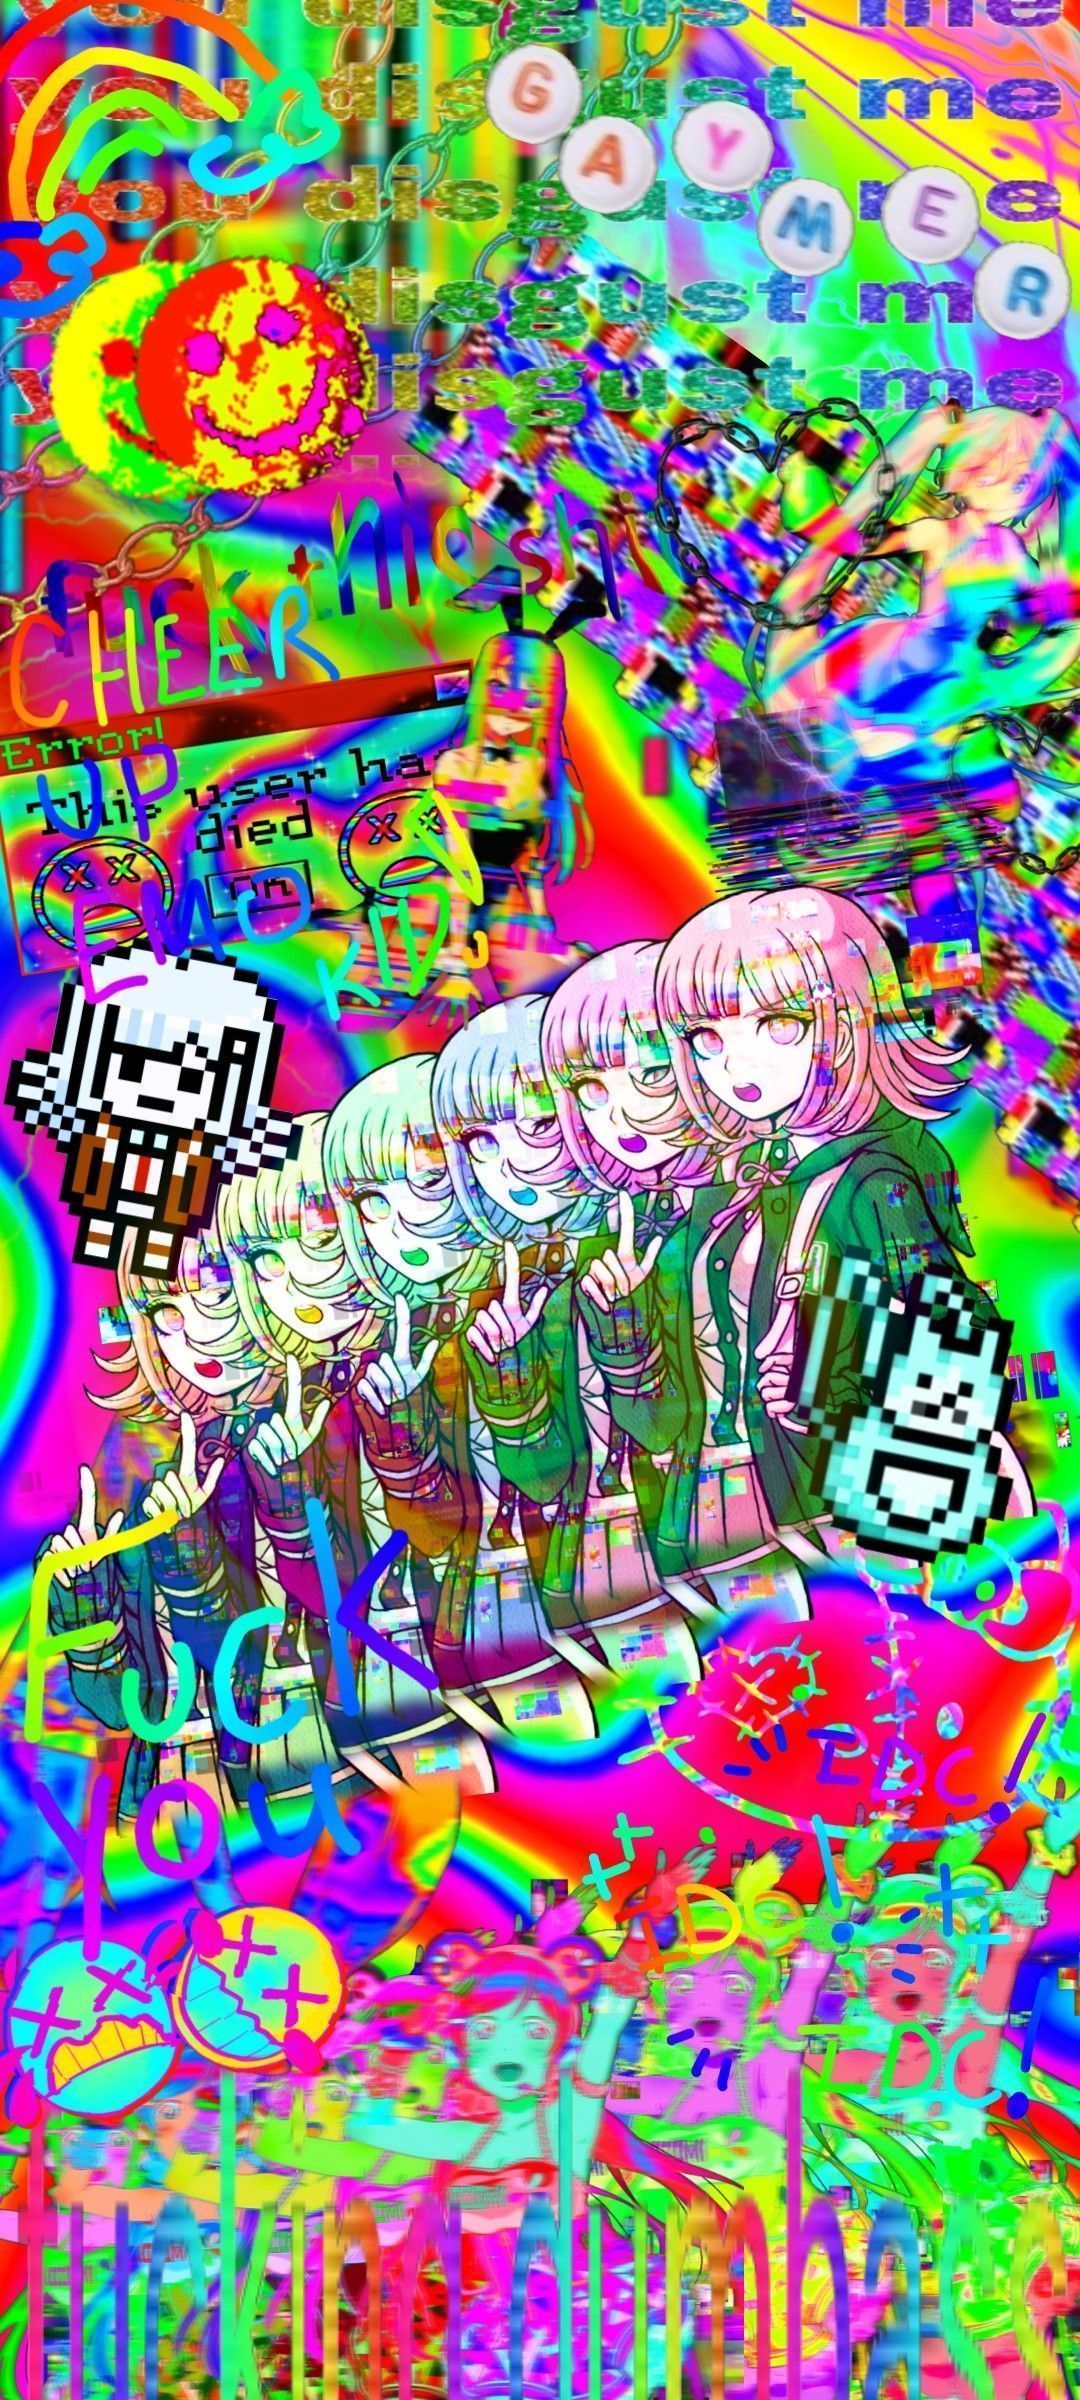 Aesthetic anime wallpaper for phone with anime girls - Glitchcore